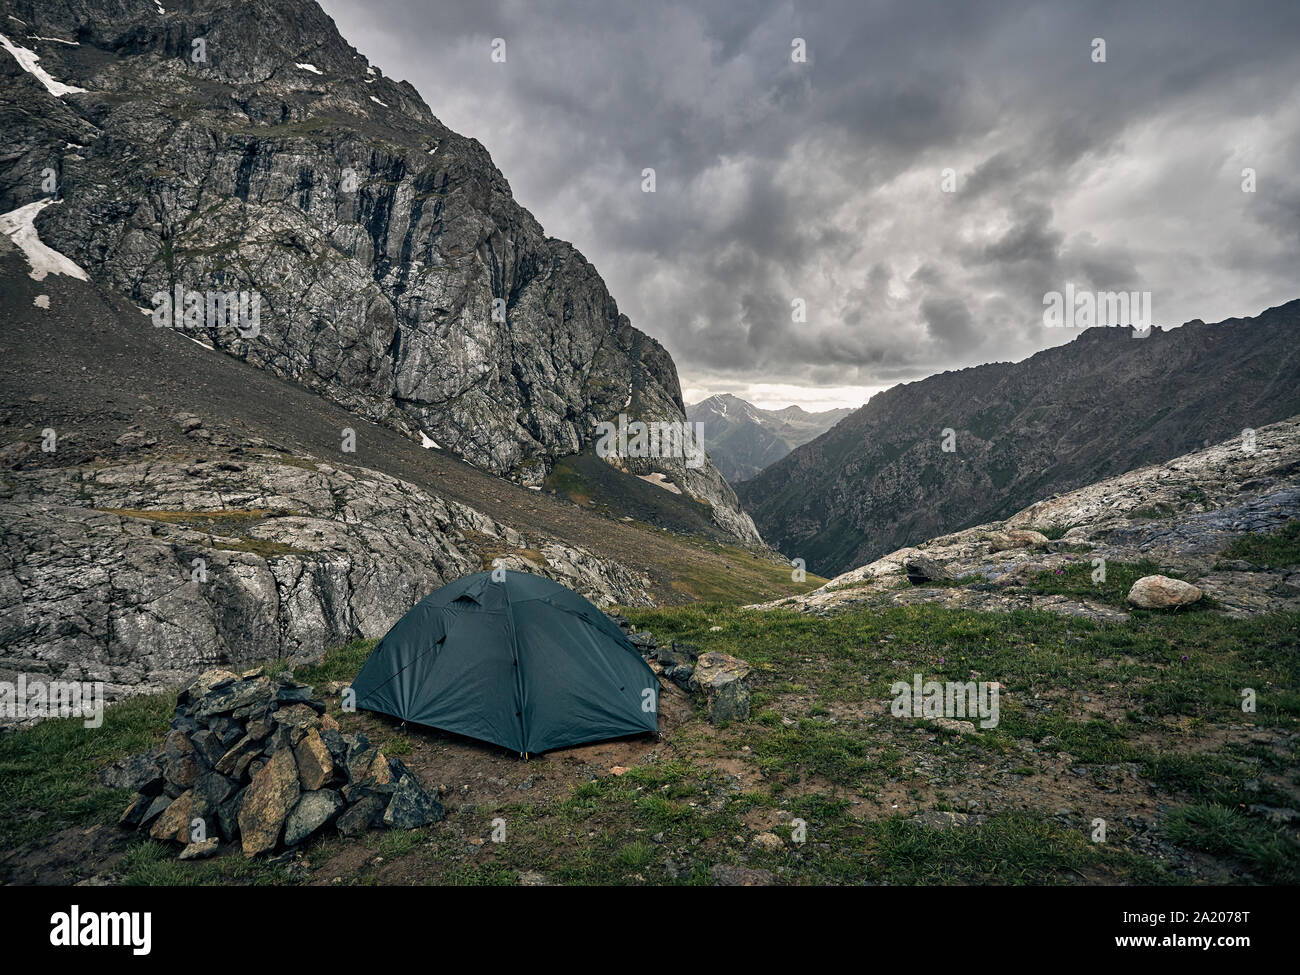 Green tent in the grey mountain valley with overcast rainy clouds in Karakol national park, Kyrgyzstan Stock Photo